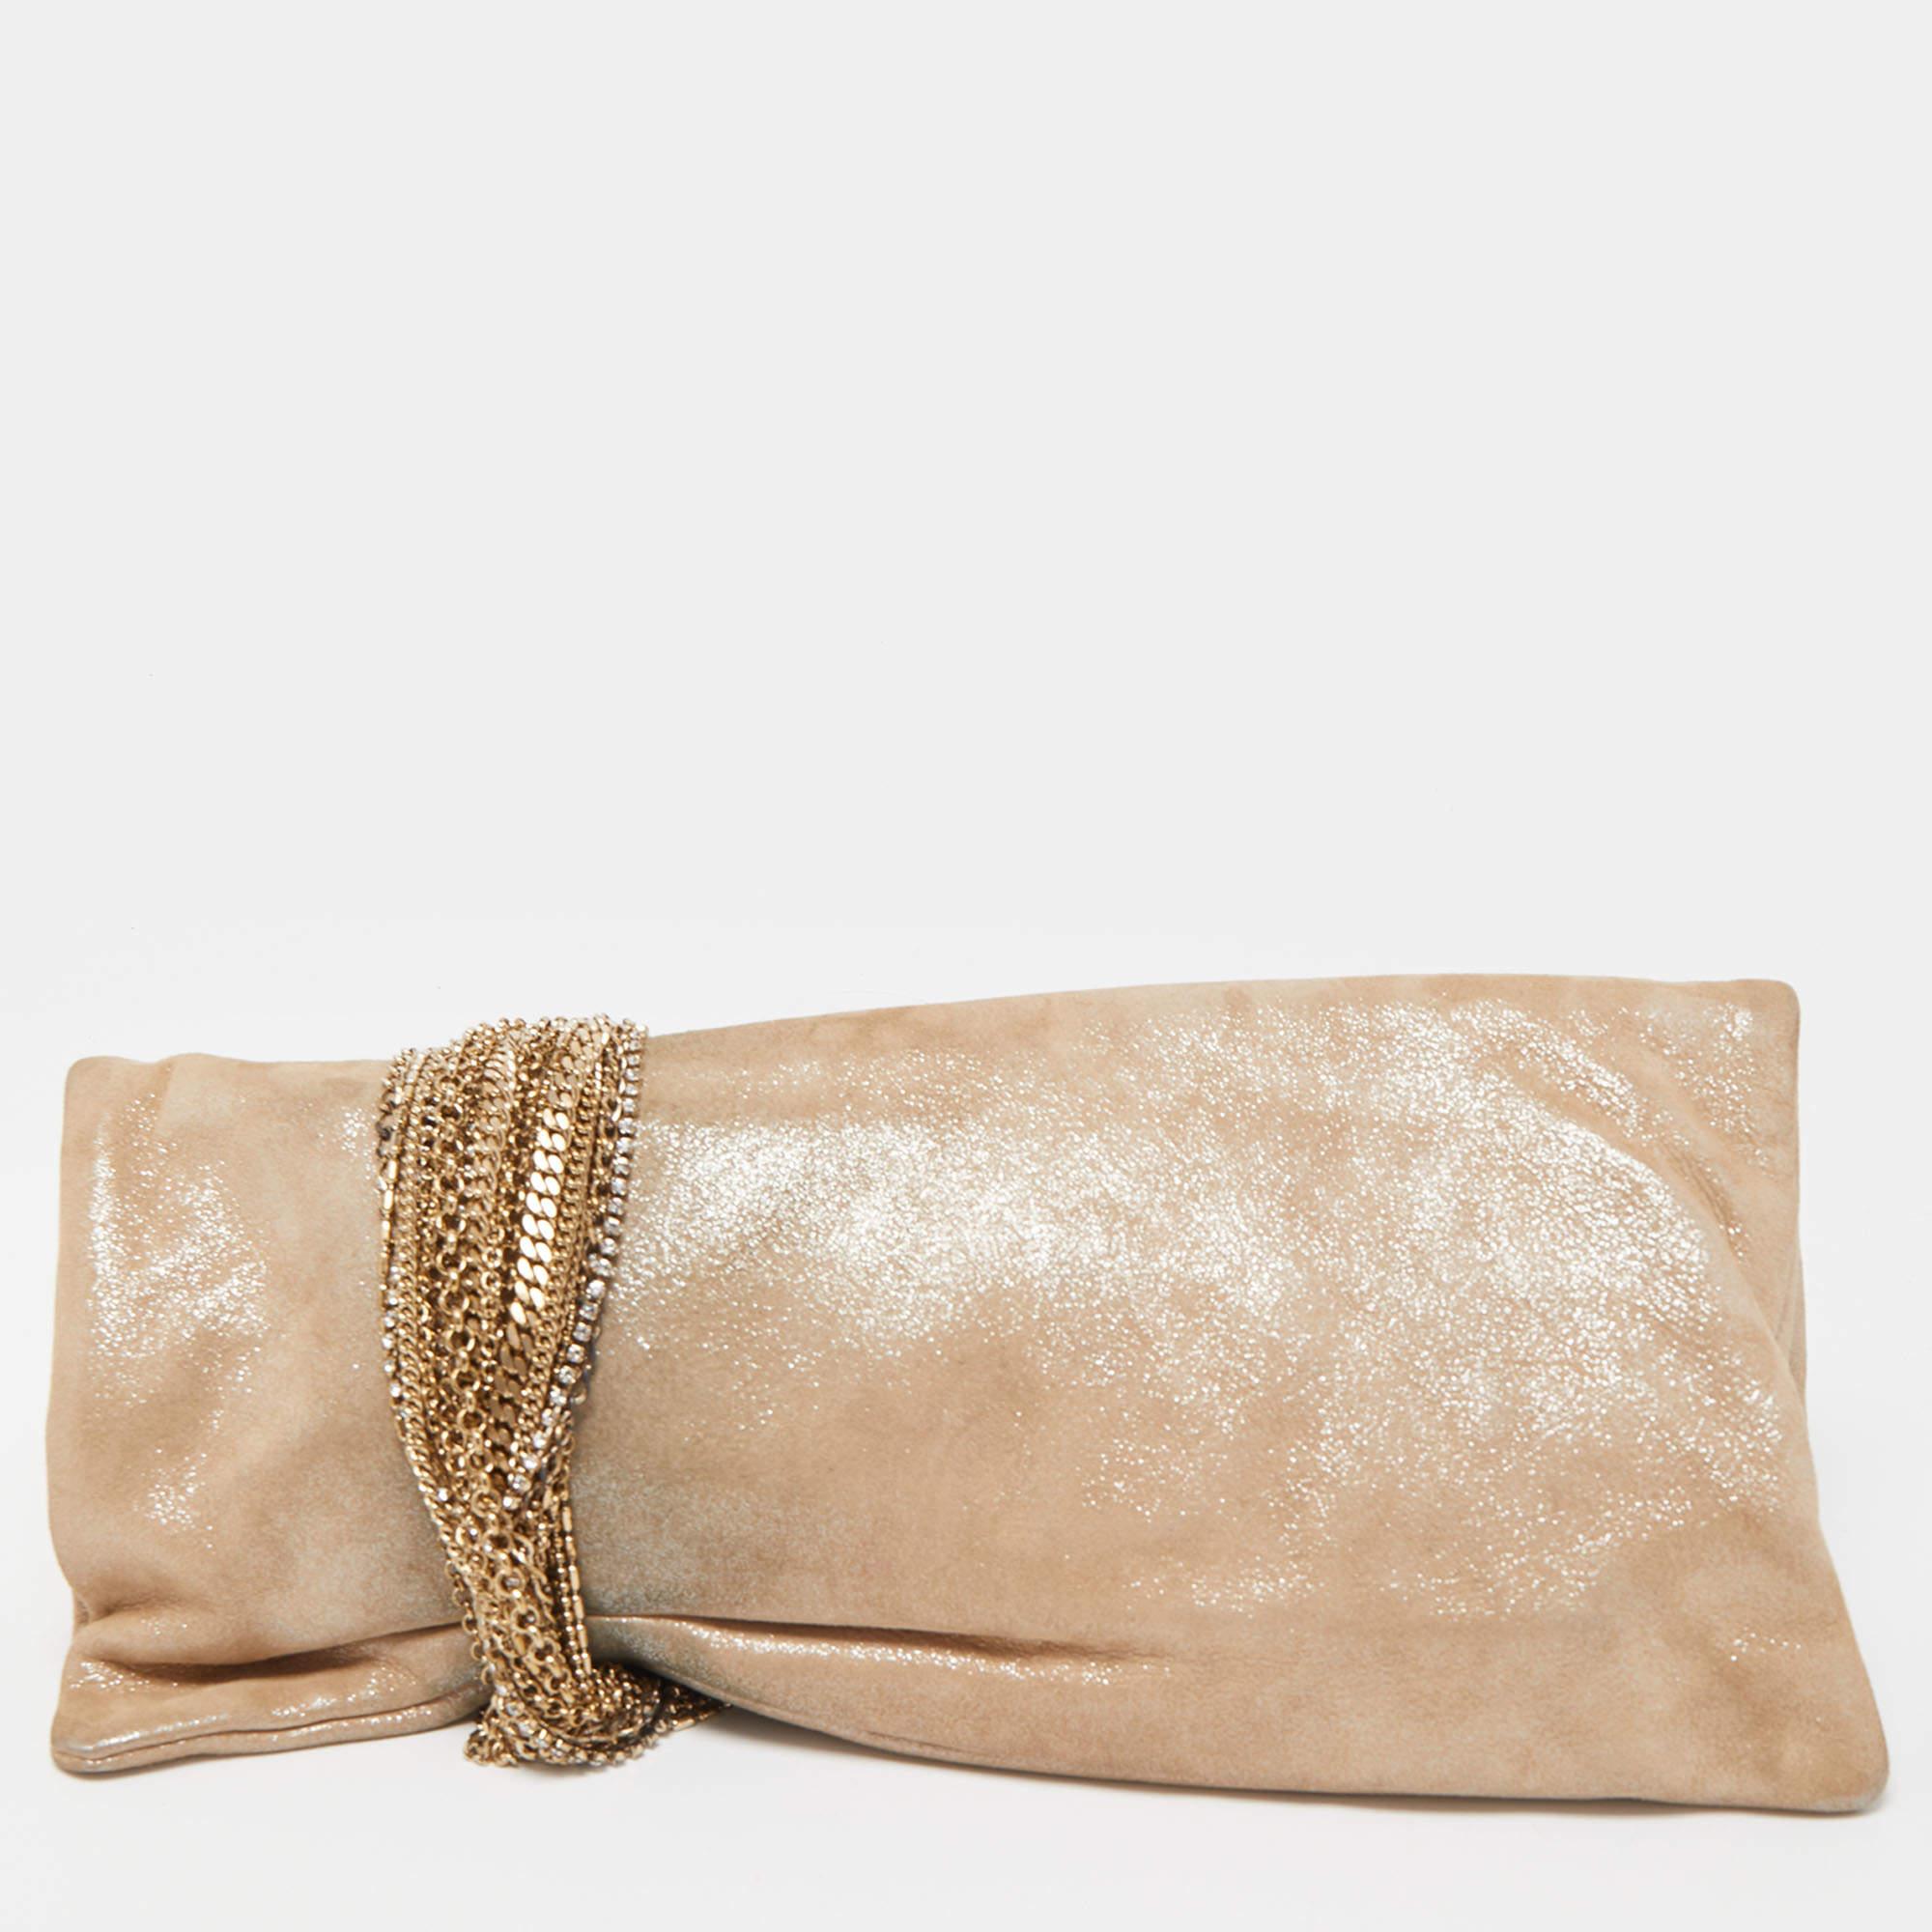 A classy and charming party accessory as attractive as this Chandra clutch will surely highlight your luxe taste in fashion. It is made of shimmering suede and elevated with signature chain detail.

Includes: Original Dustbag
